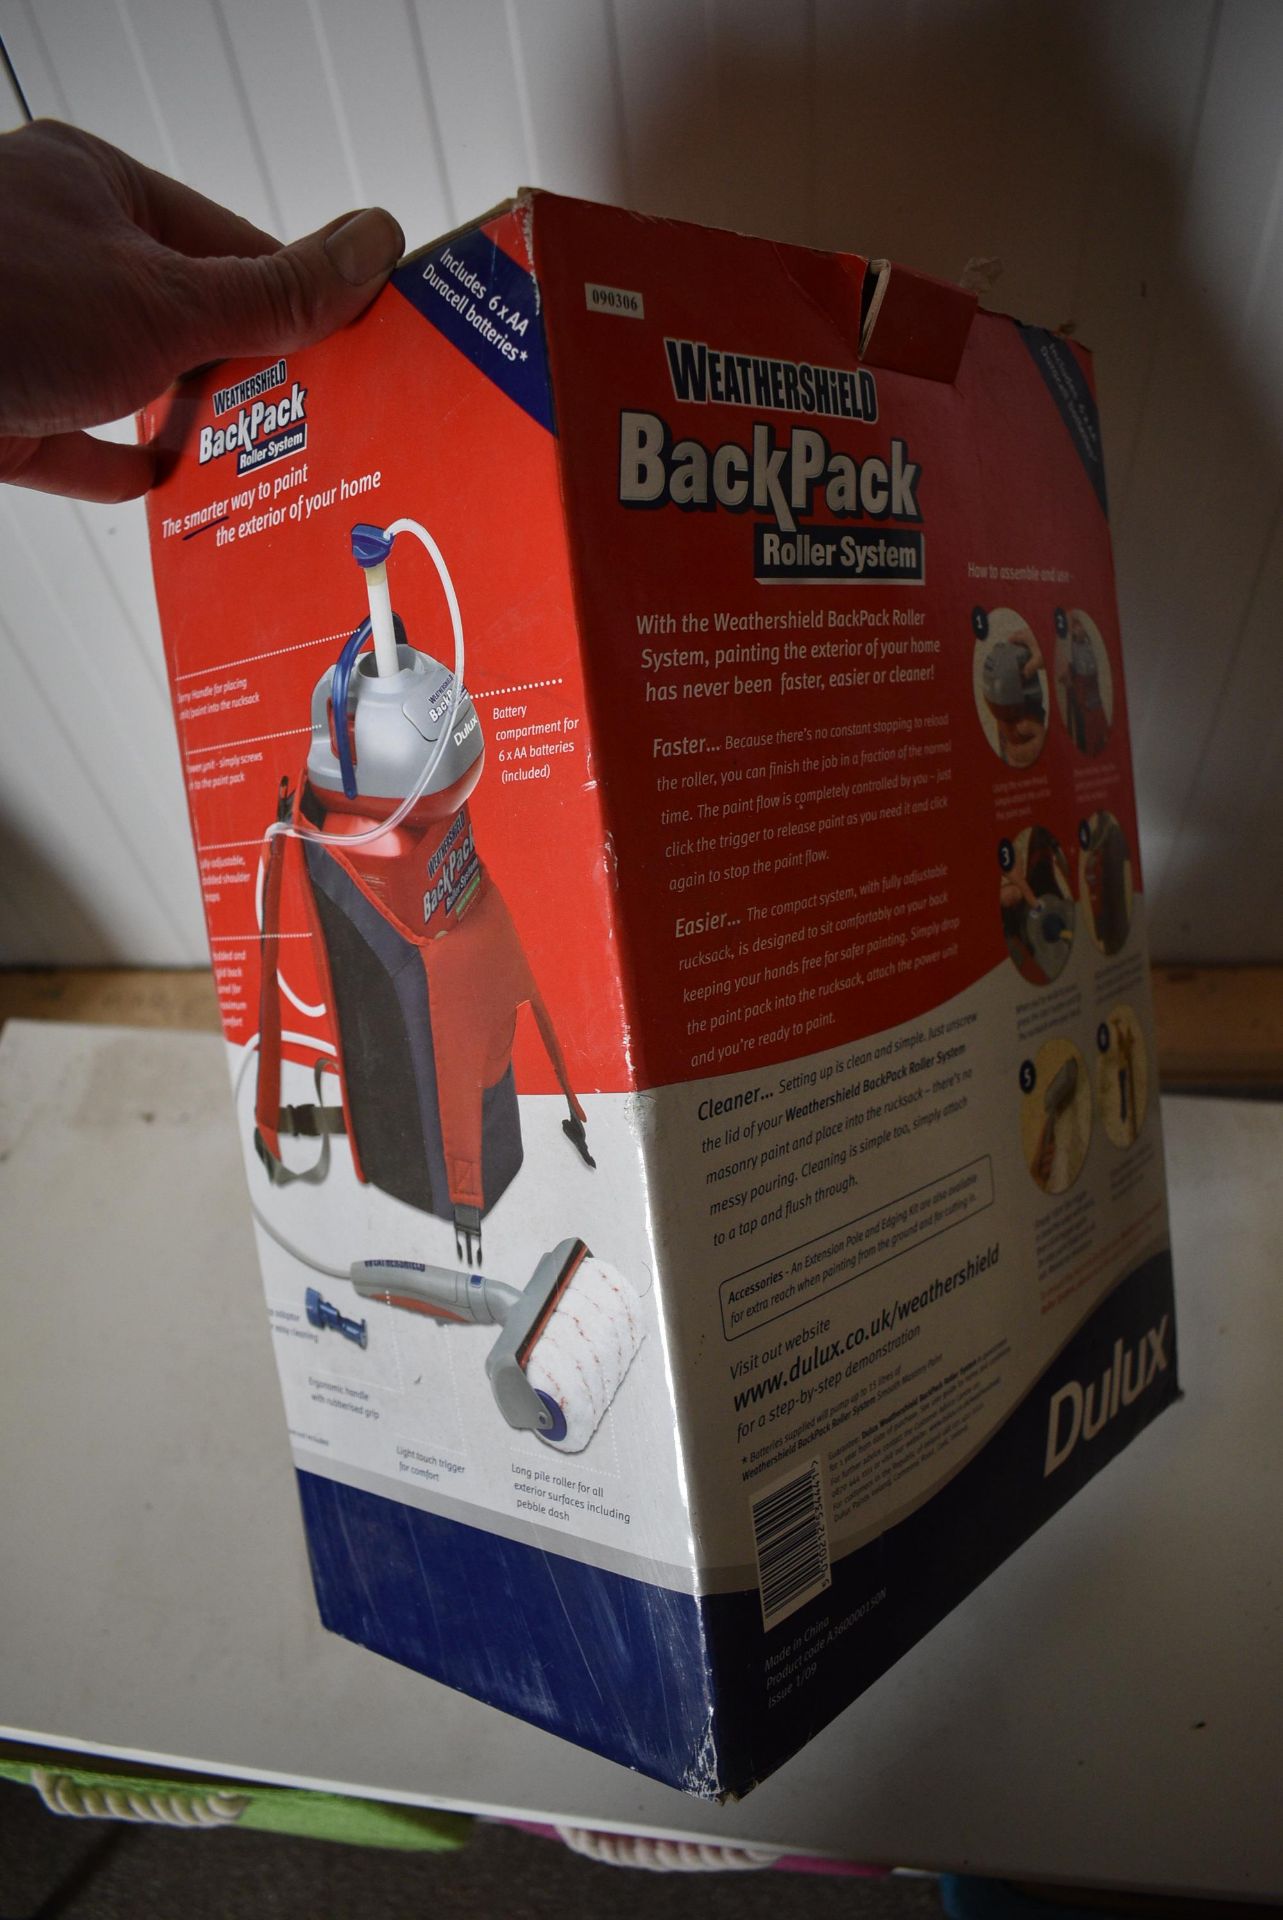 Dulux Weathershield Backpack Roller System - Image 2 of 2